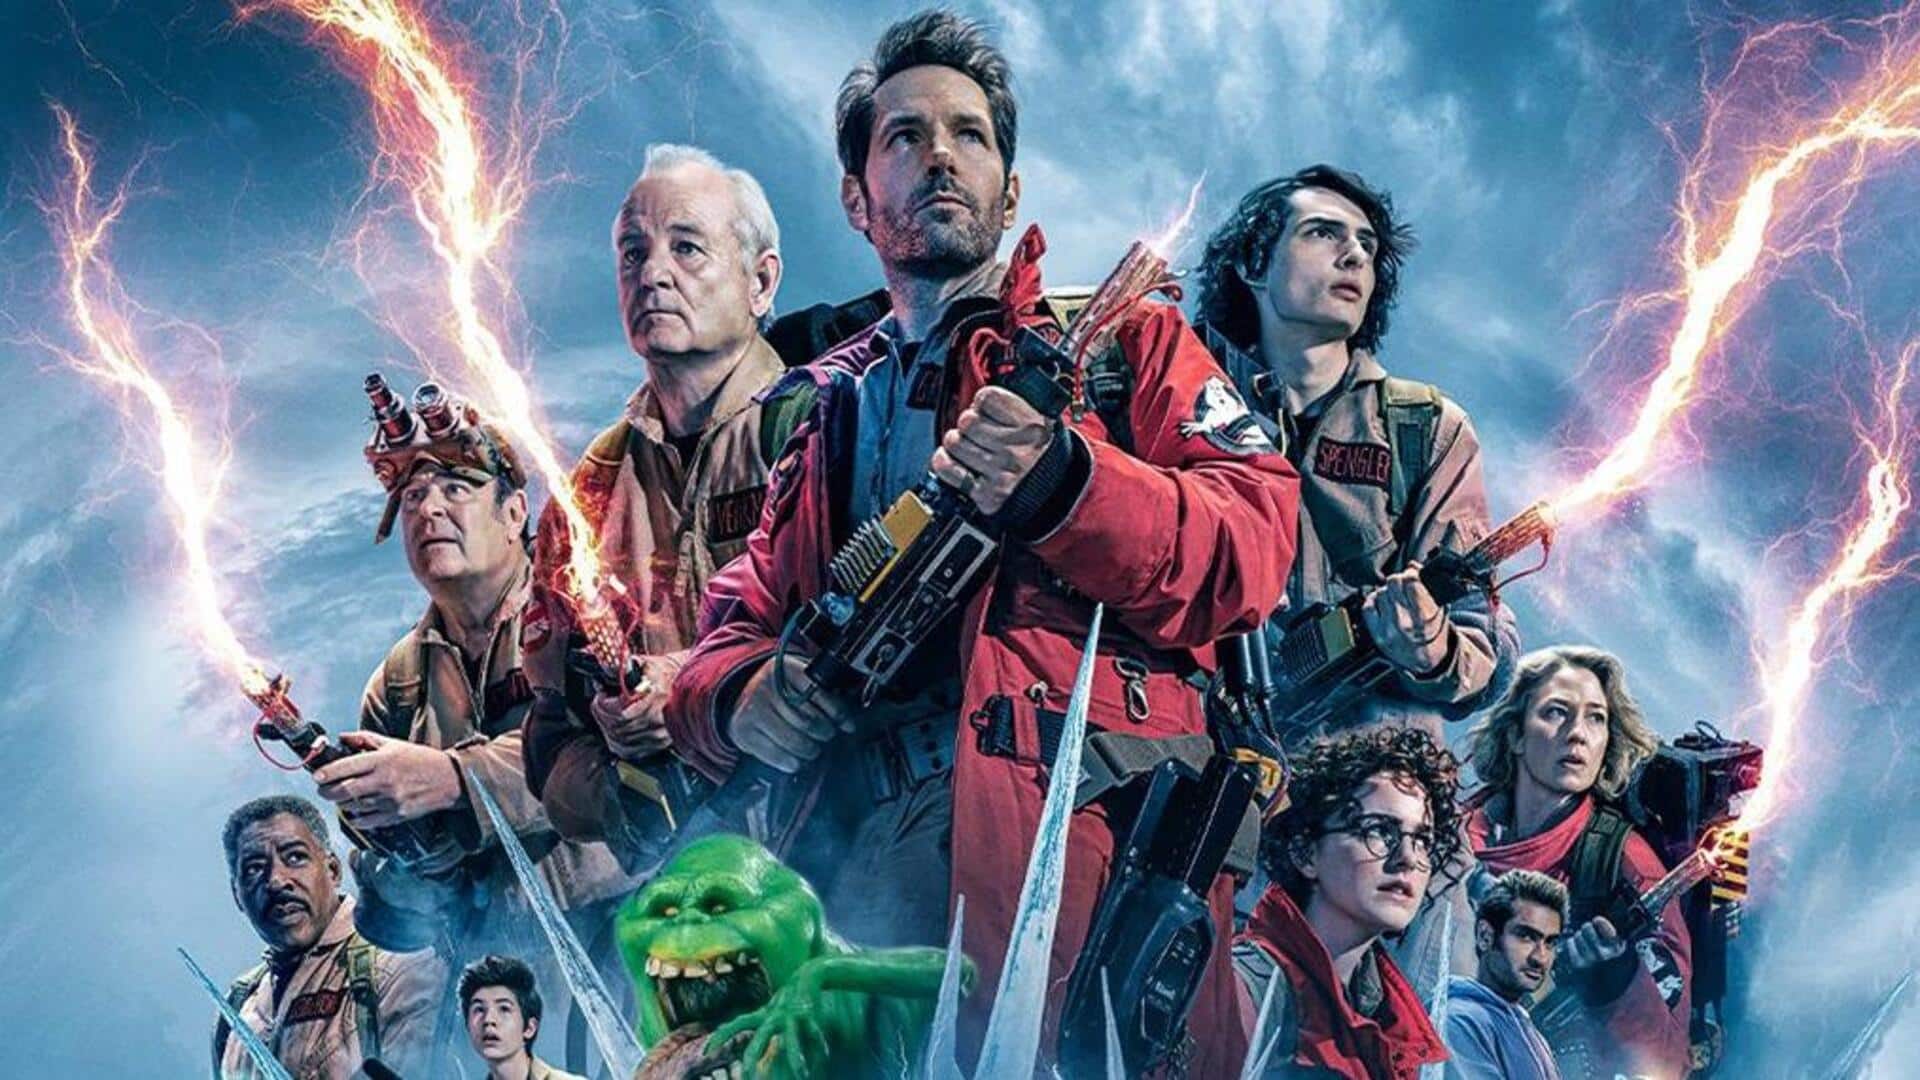 'Ghostbusters: Frozen Empire': India release date, cast, and box office